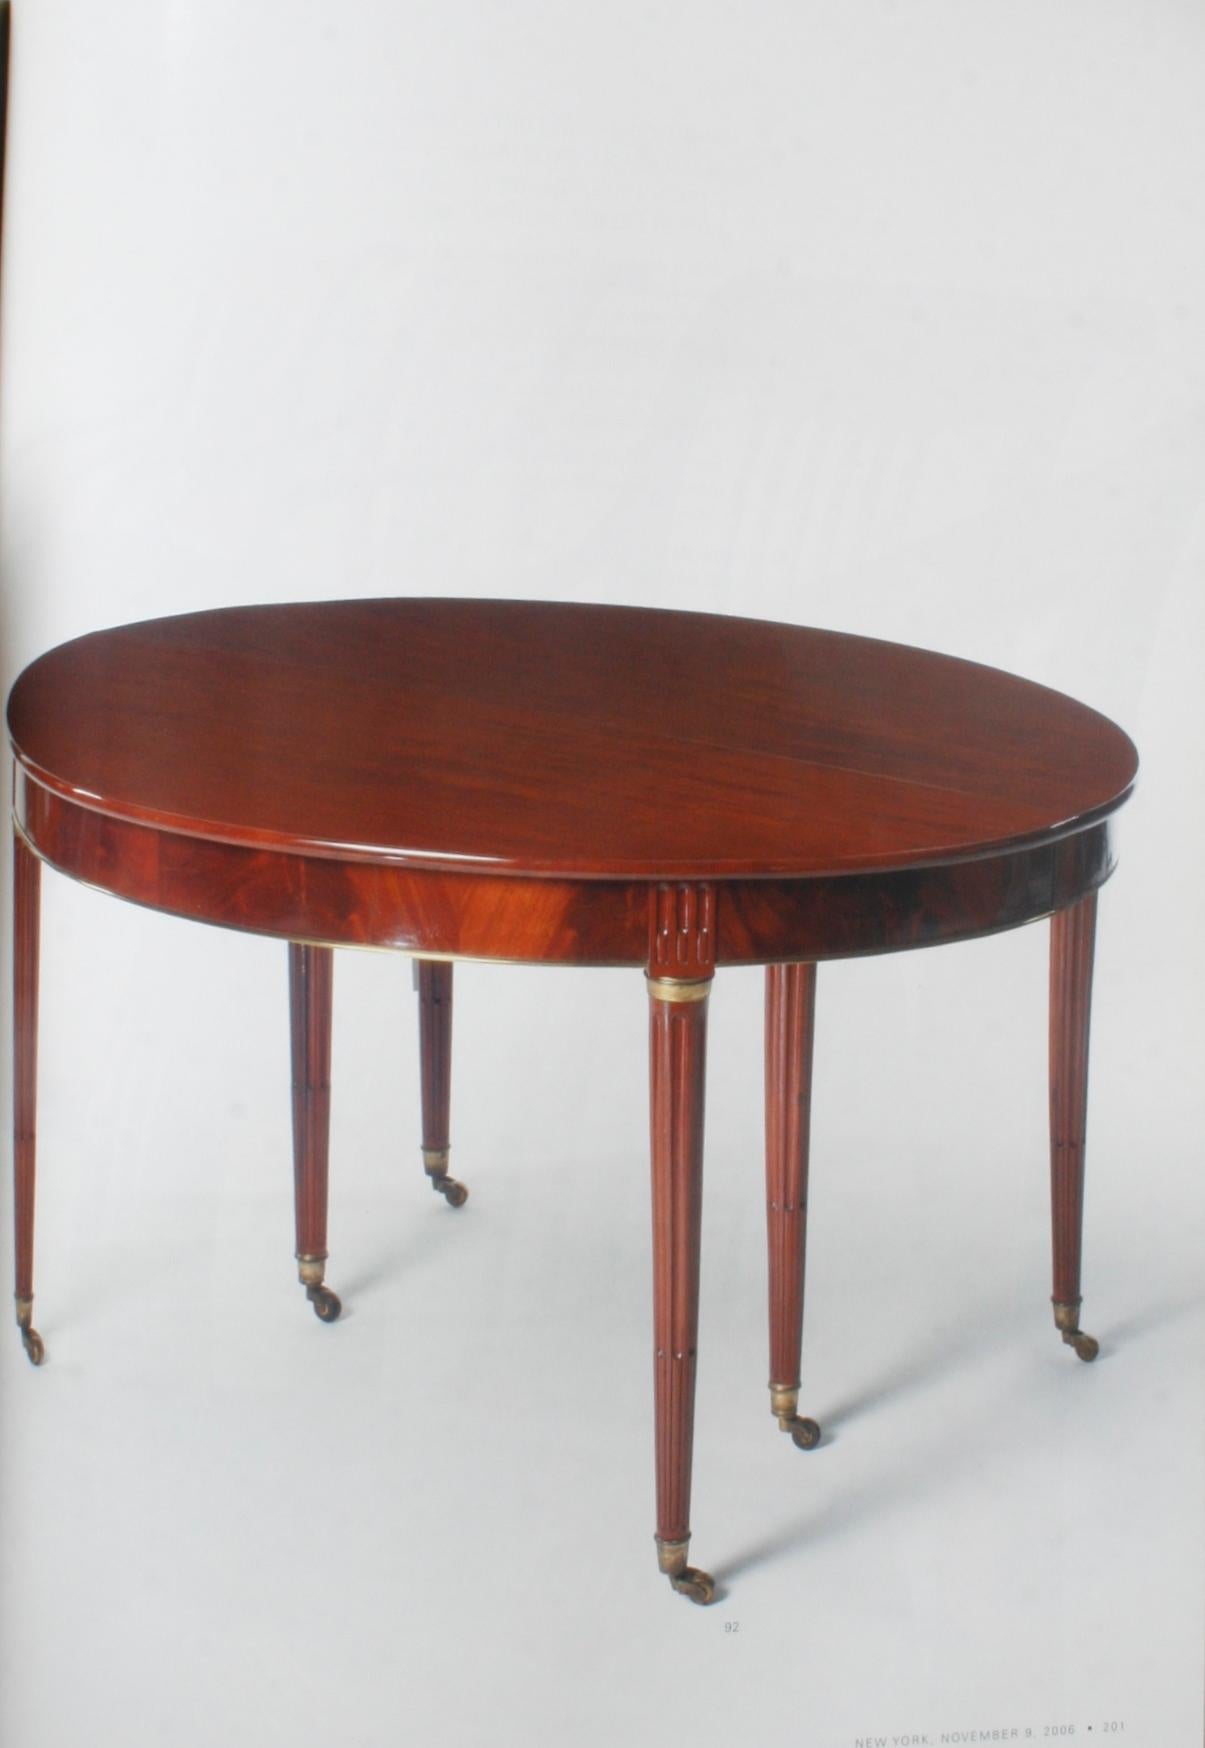 Sotheby's, Important French Furniture from the Collection of Dr. Benchoufi 7